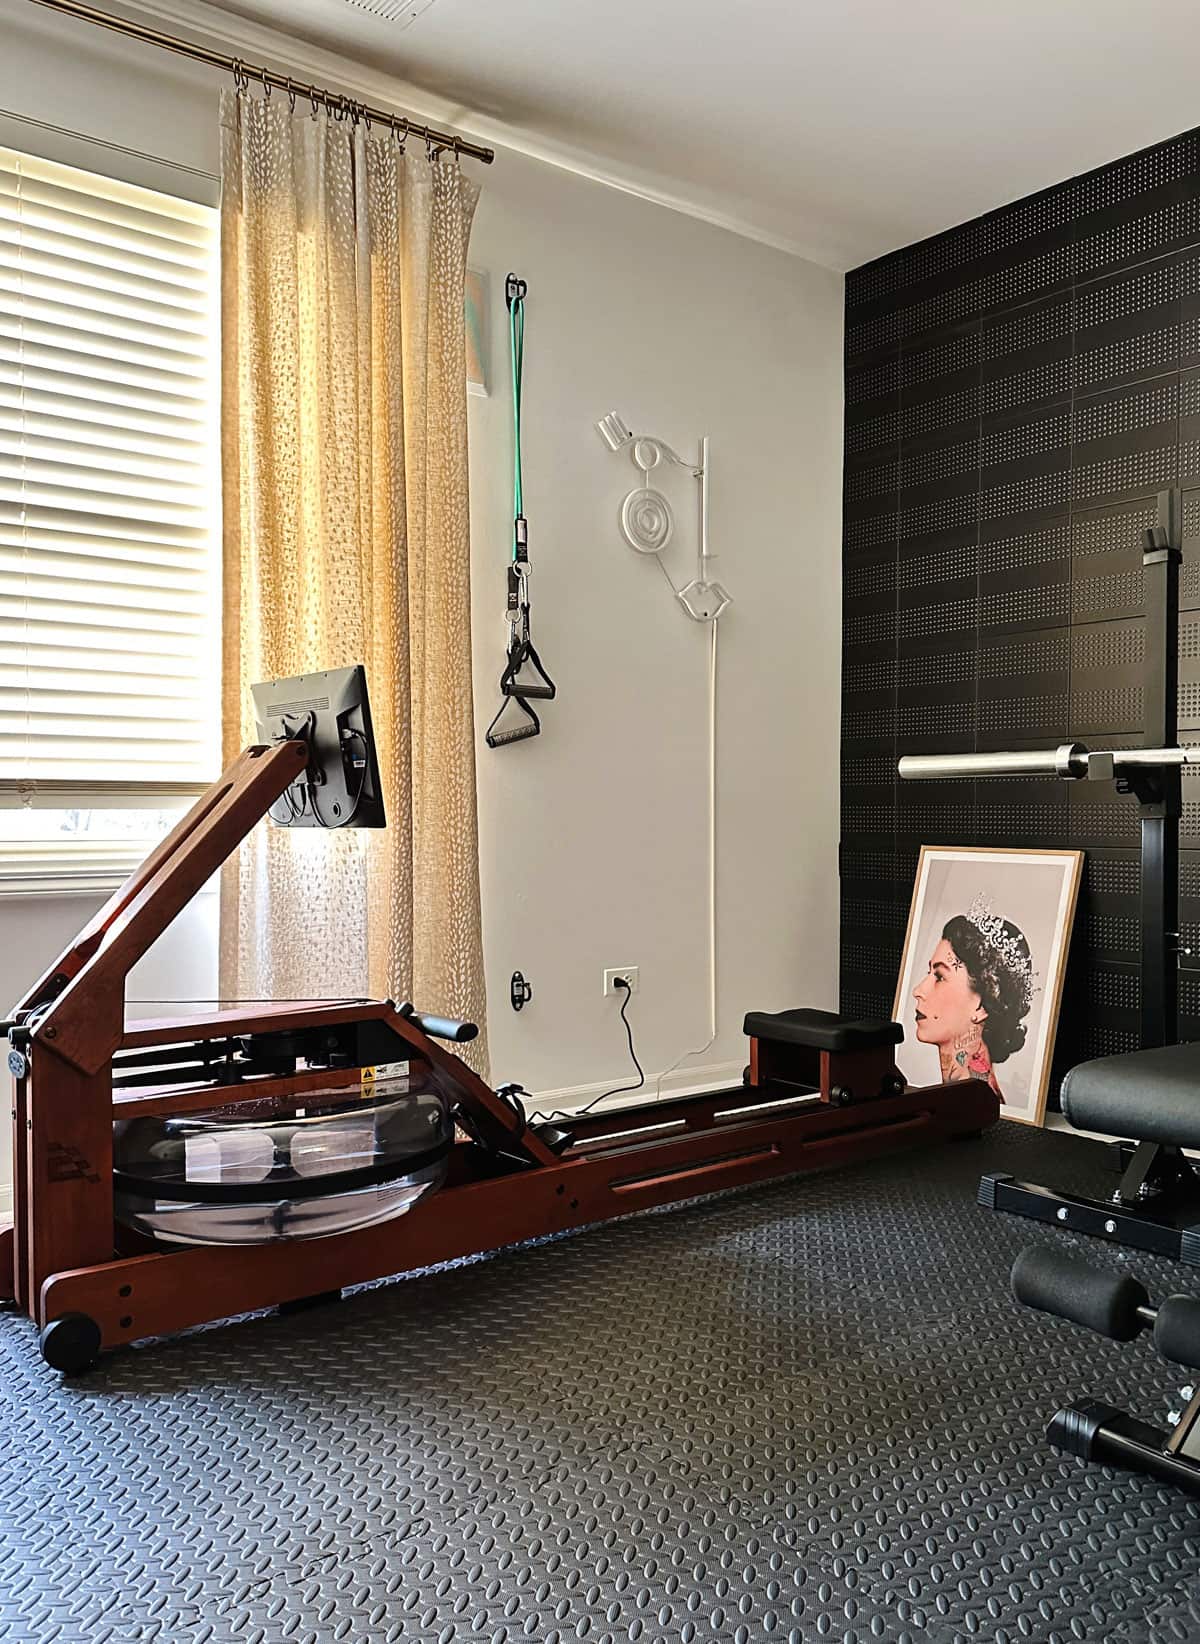 At Home Workout Equipment for Small Spaces